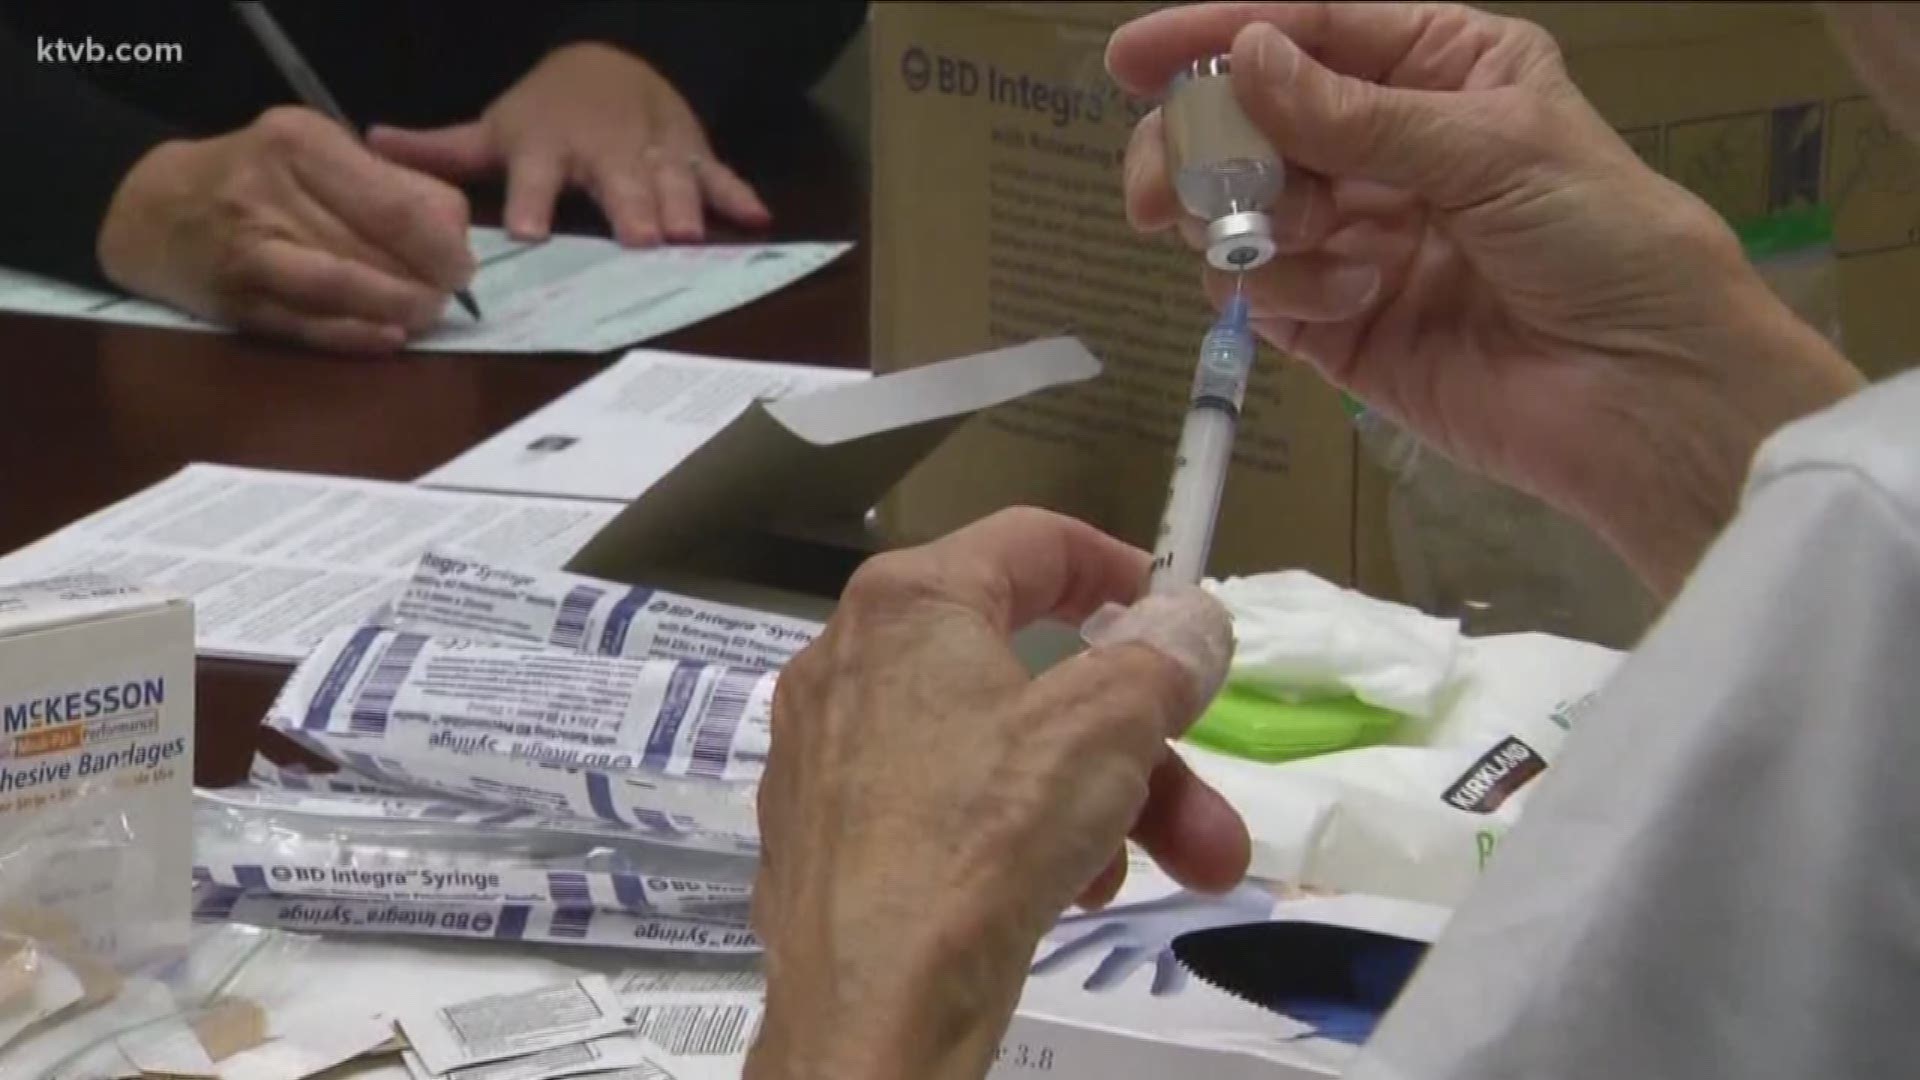 We wanted to find out why the flu is so bad this season and does the flu shot actually help.